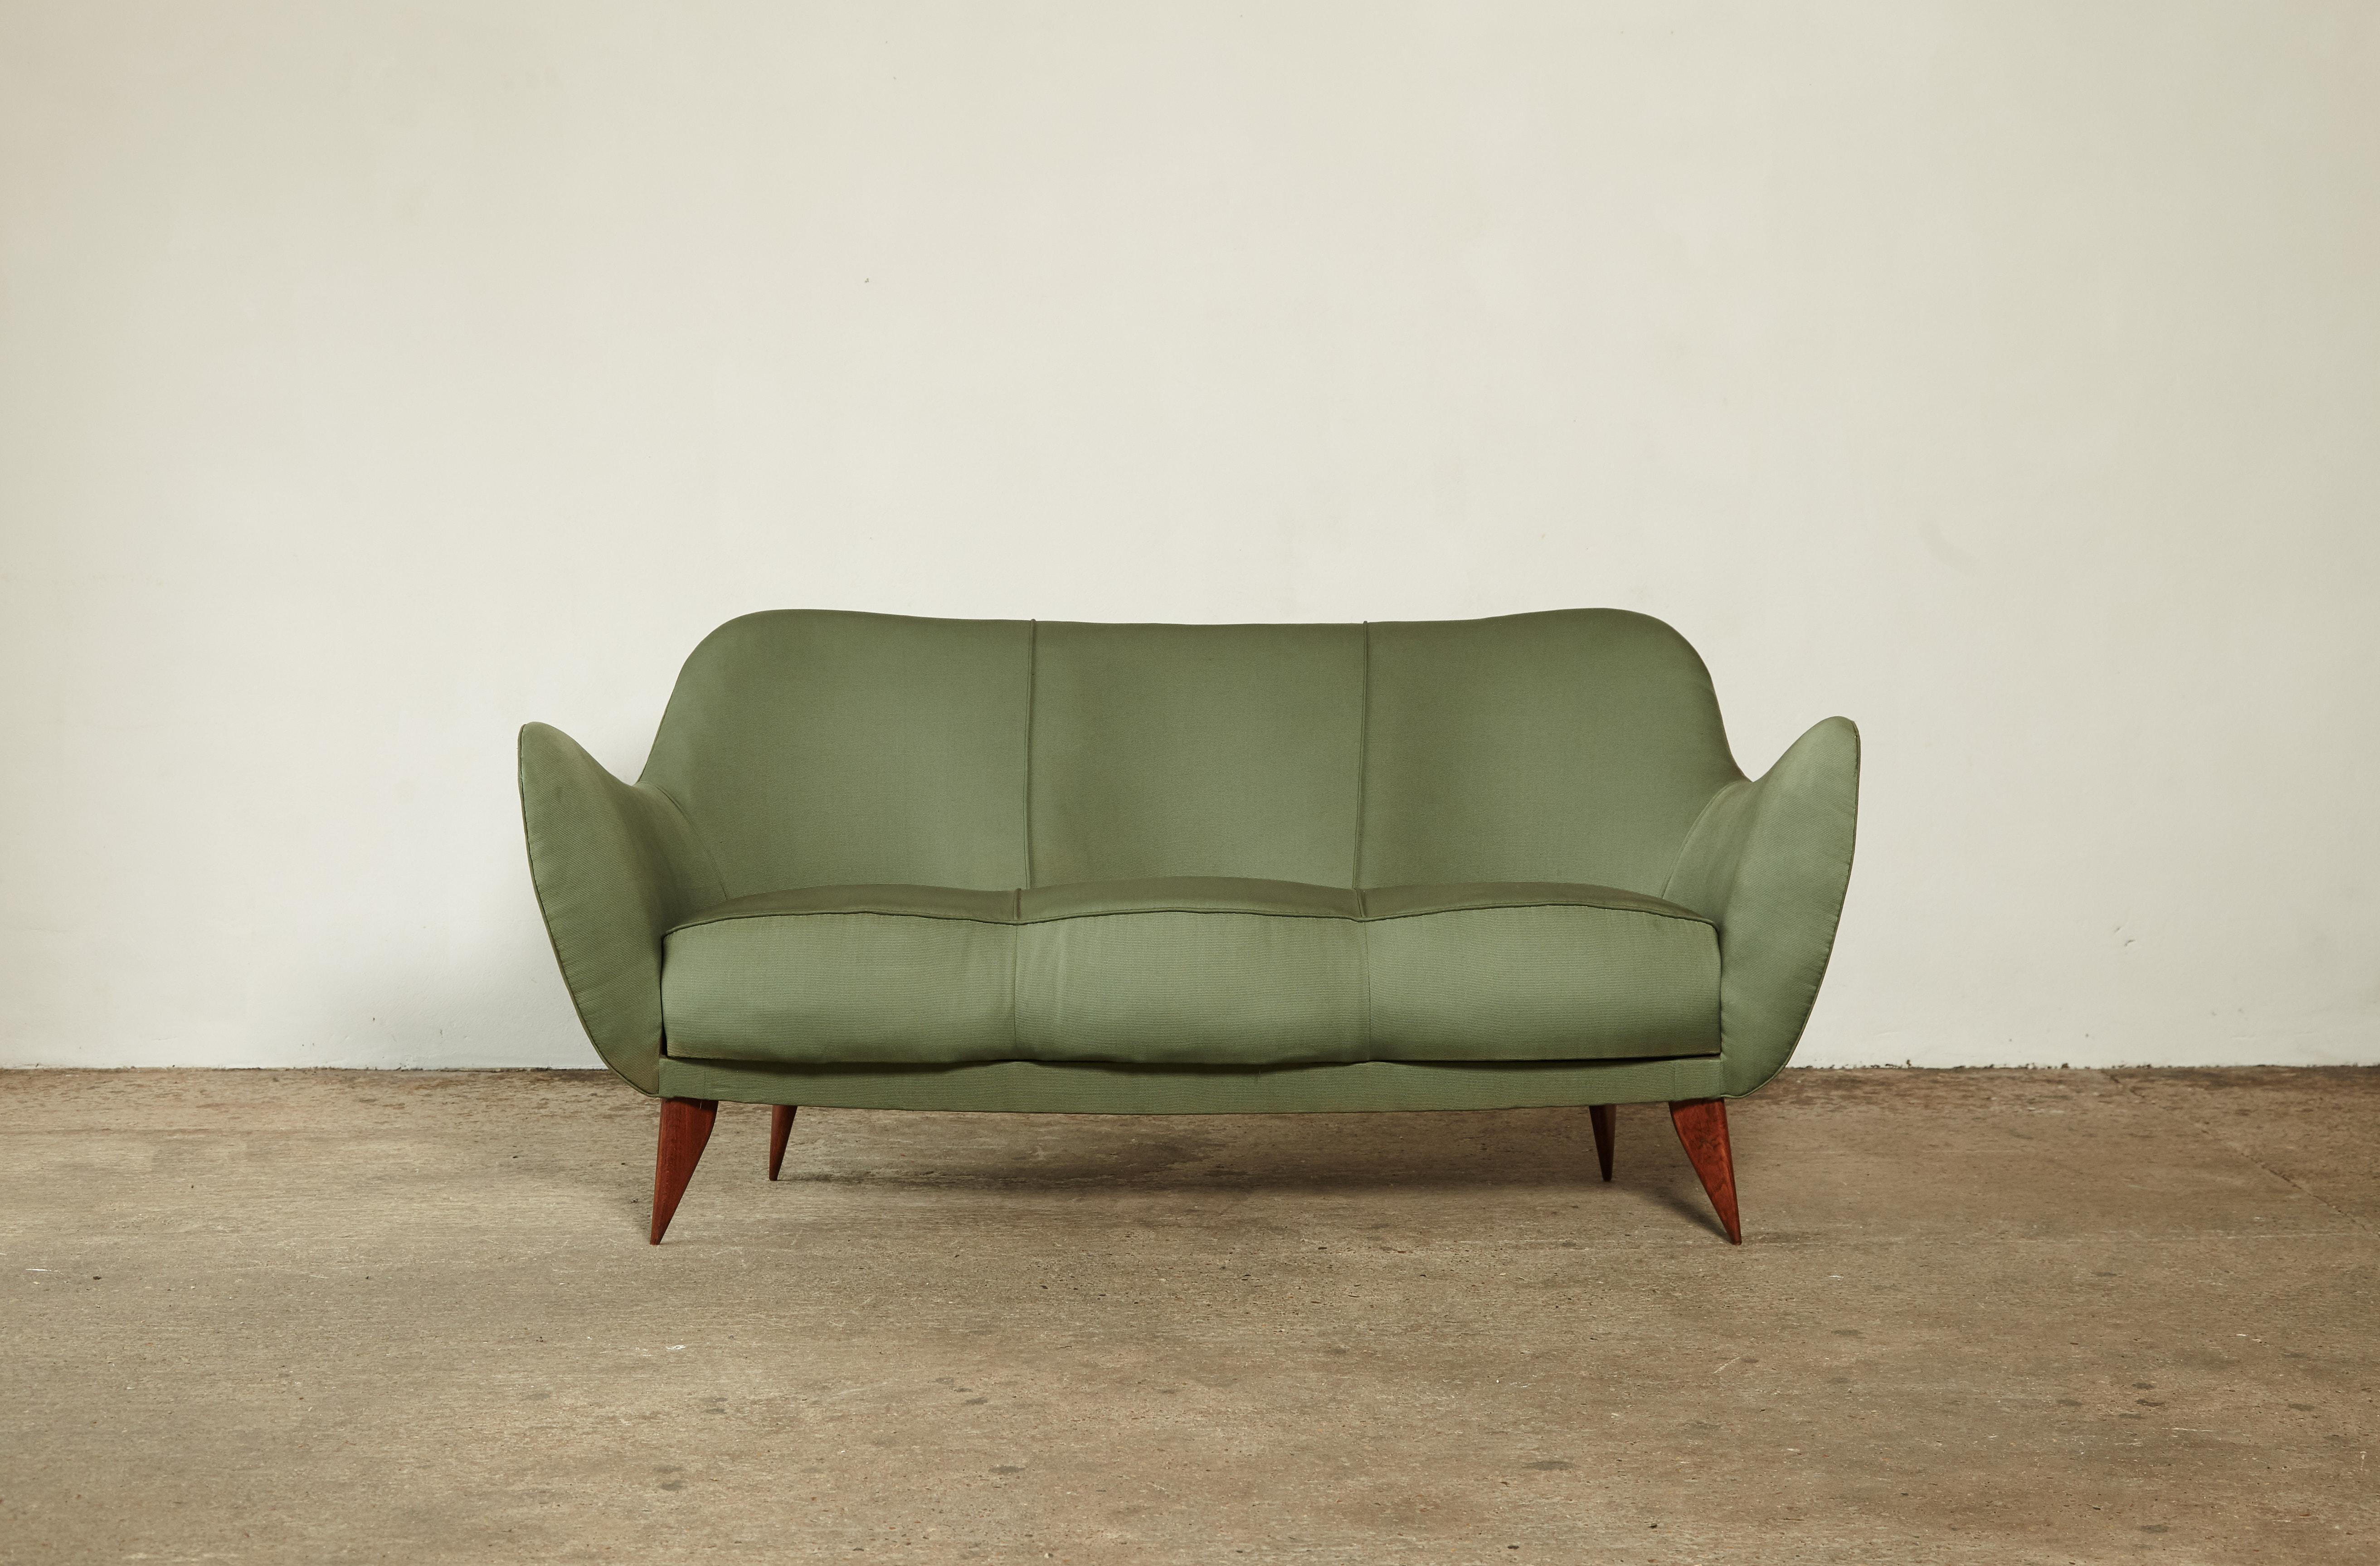 A rare 3 person Giulia Veronesi Perla sofa produced by ISA Bergamo, Italy 1950s. With markers mark. Original green fabric in fairly good condition with minor signs of use and wear.  Suitable for recovery.   Fast shipping worldwide.

